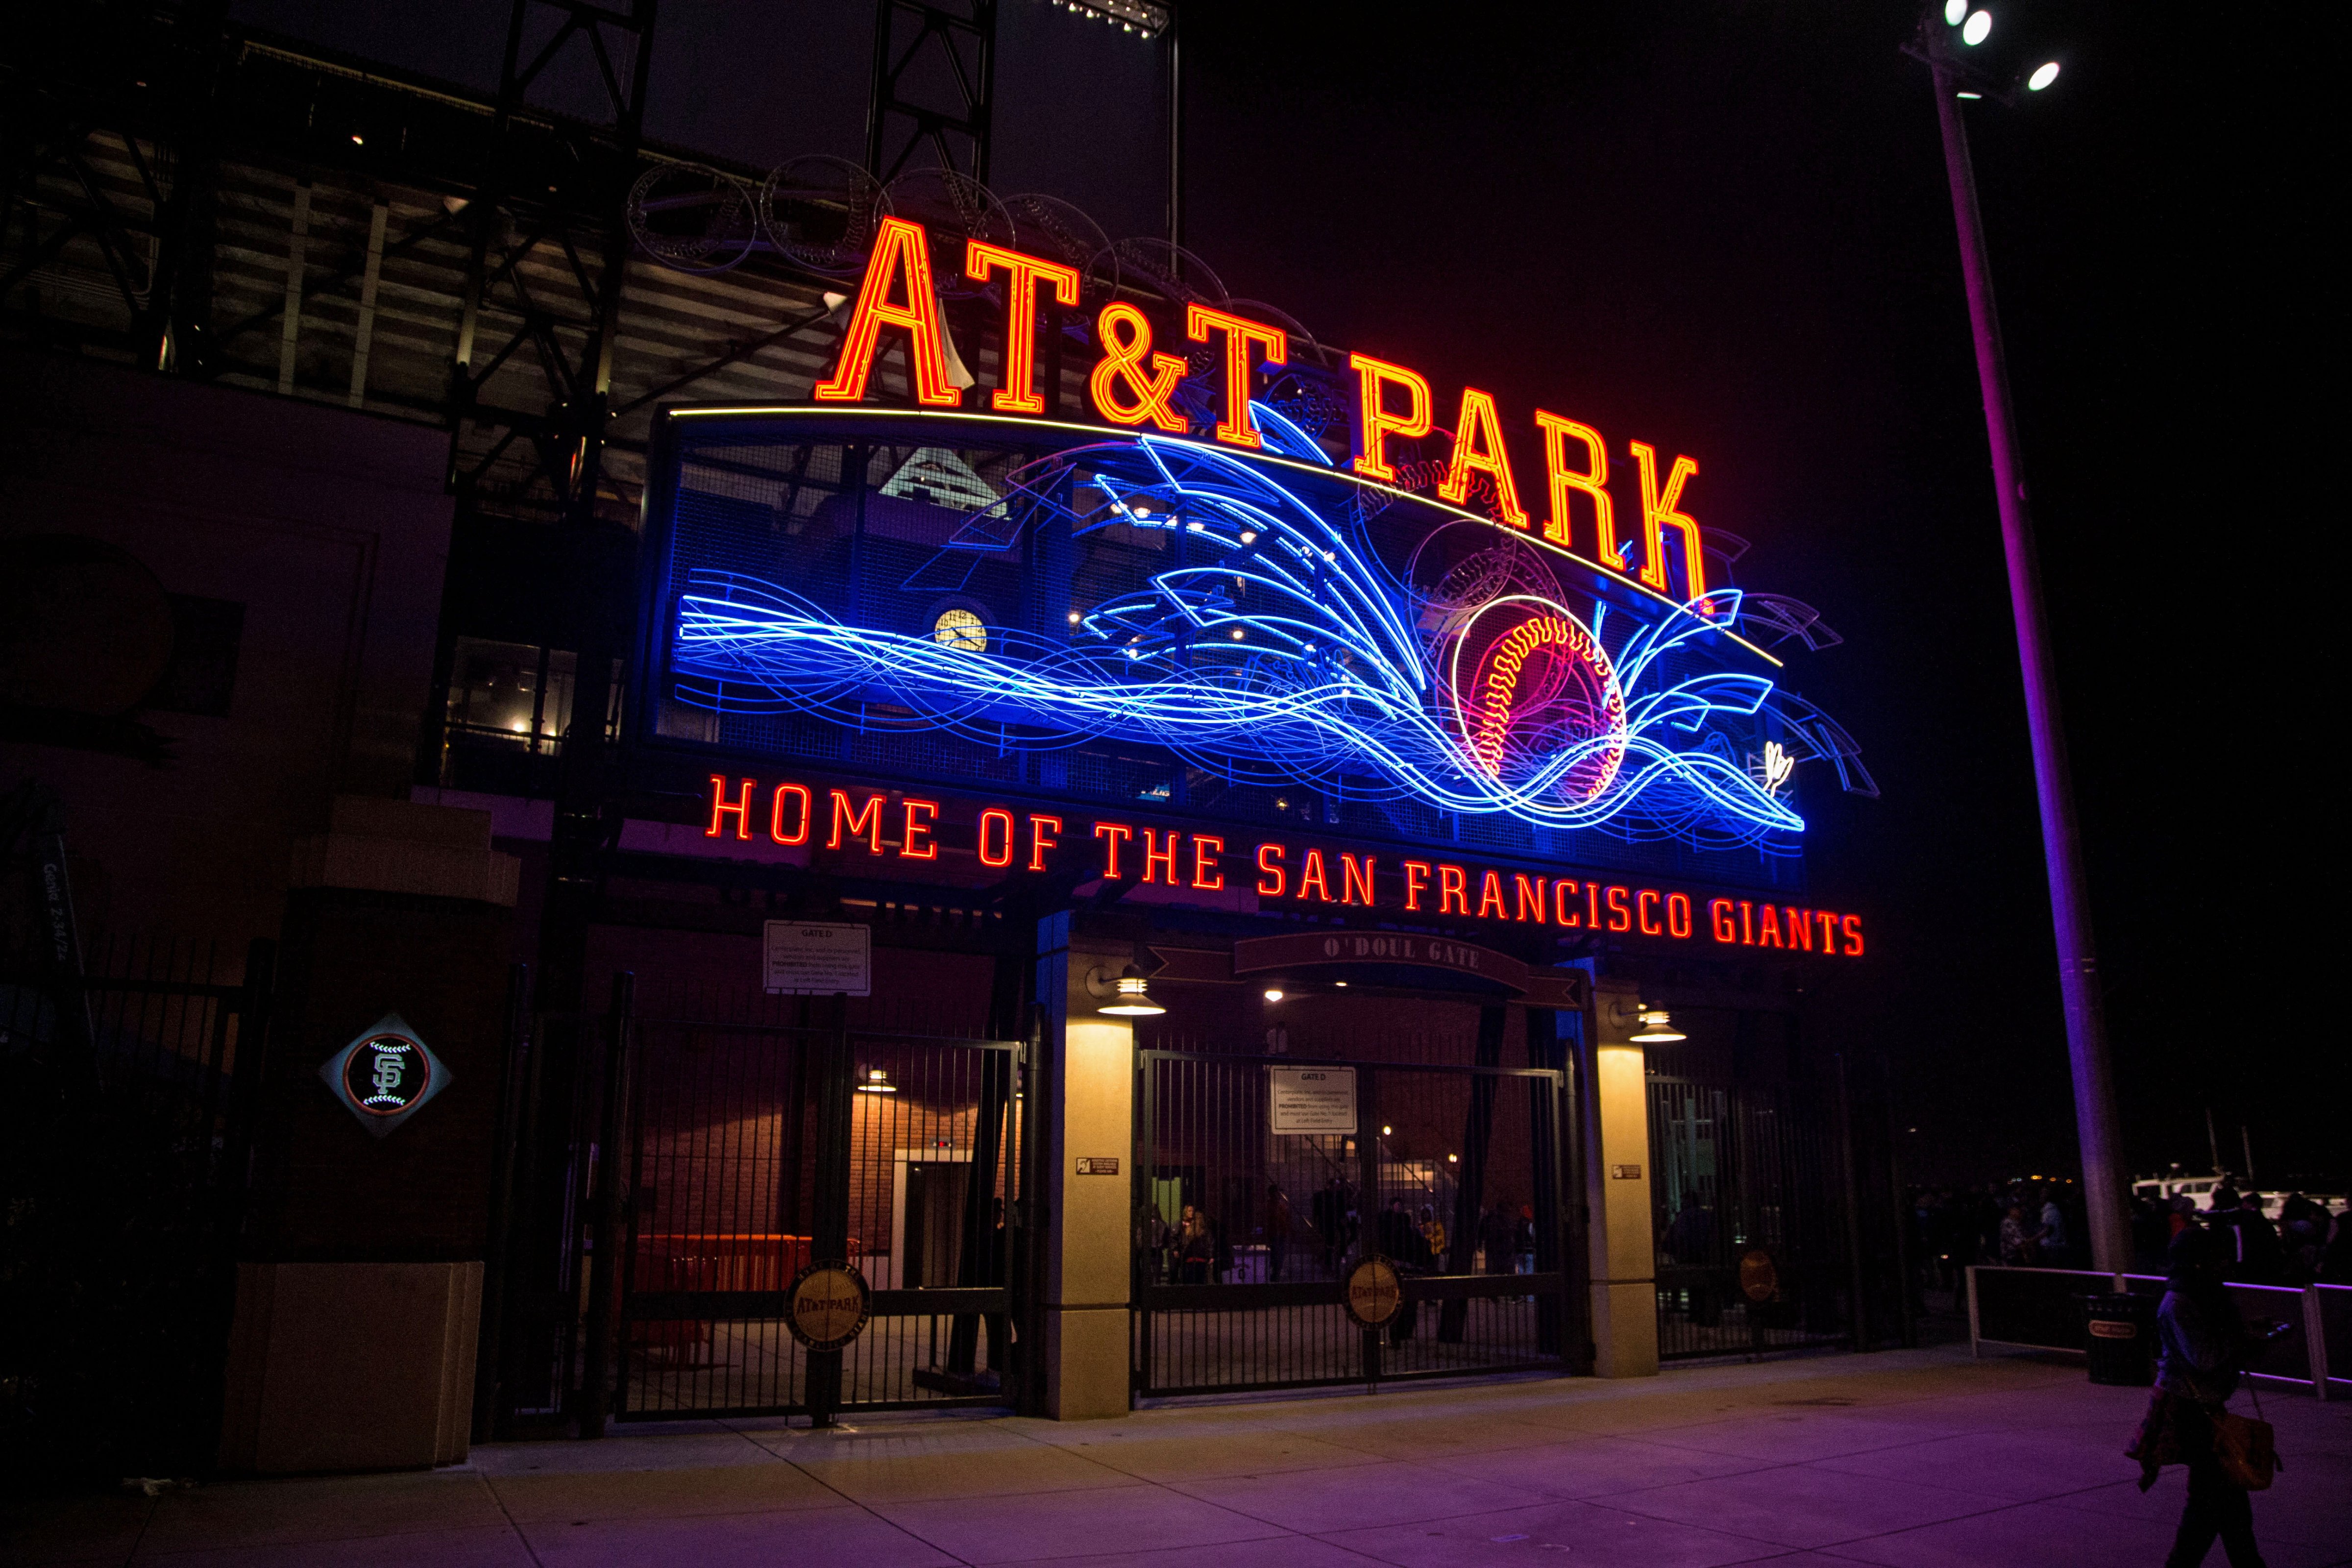 A general view of the exterior of AT&amp;T Park following the game between the San Francisco Giants and the Minnesota Twins on May 23, 2014 in San Francisco, California. (Brace Hemmelgarn—Getty Images)